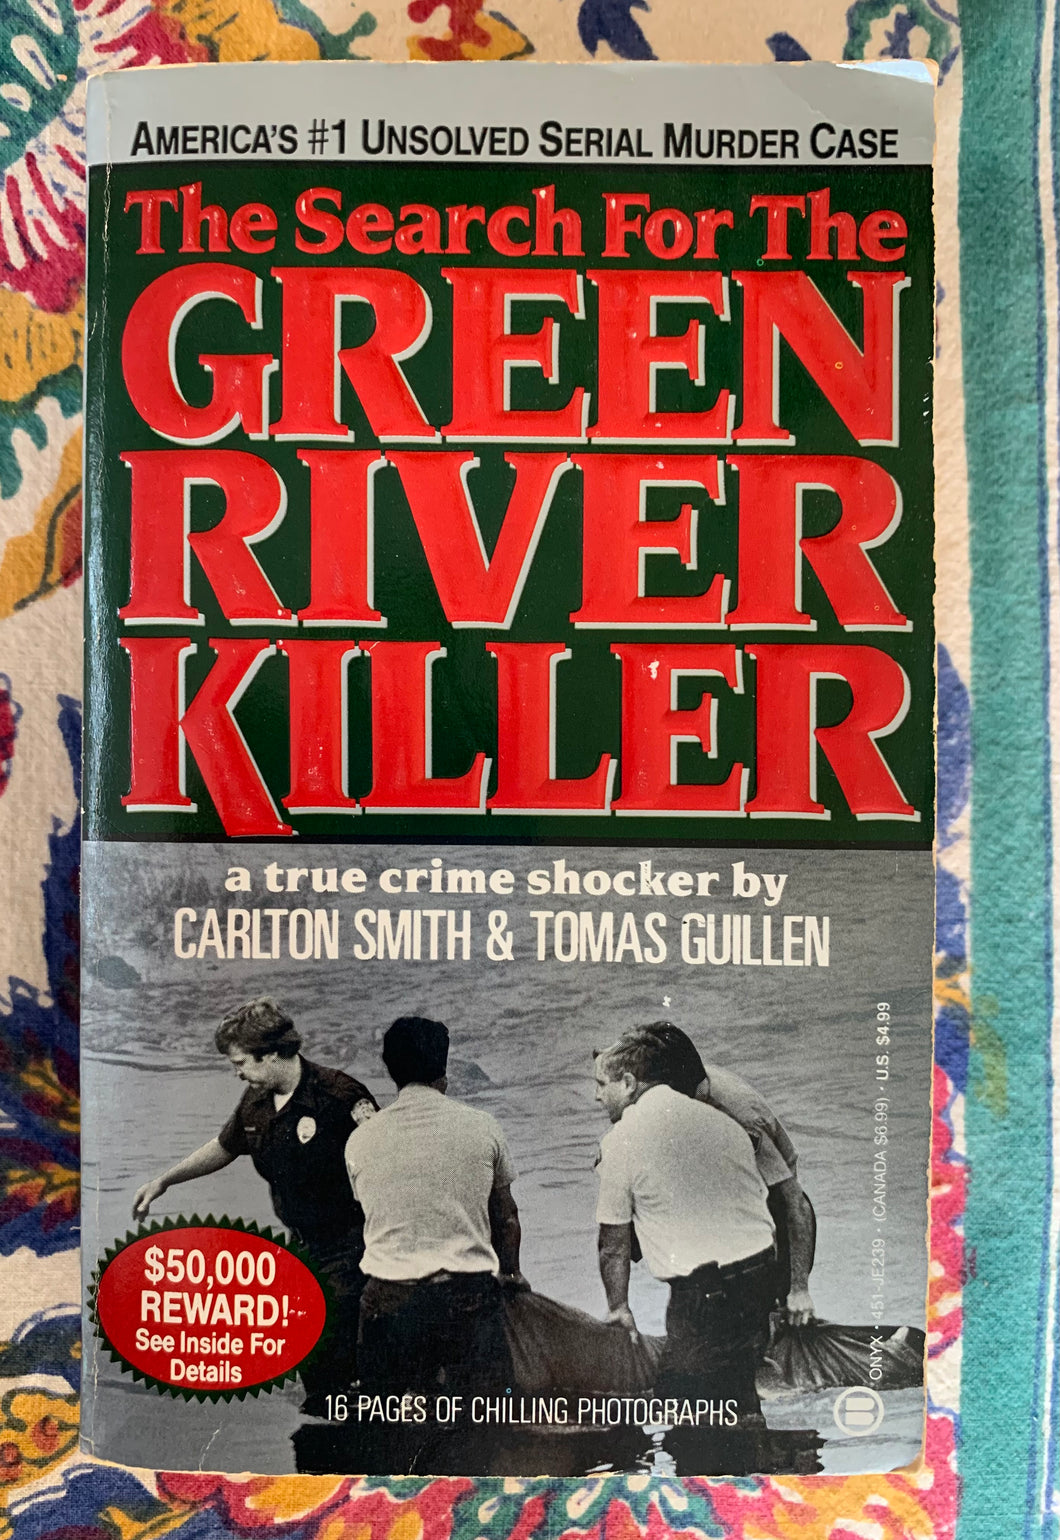 The Search For The Green River Killer